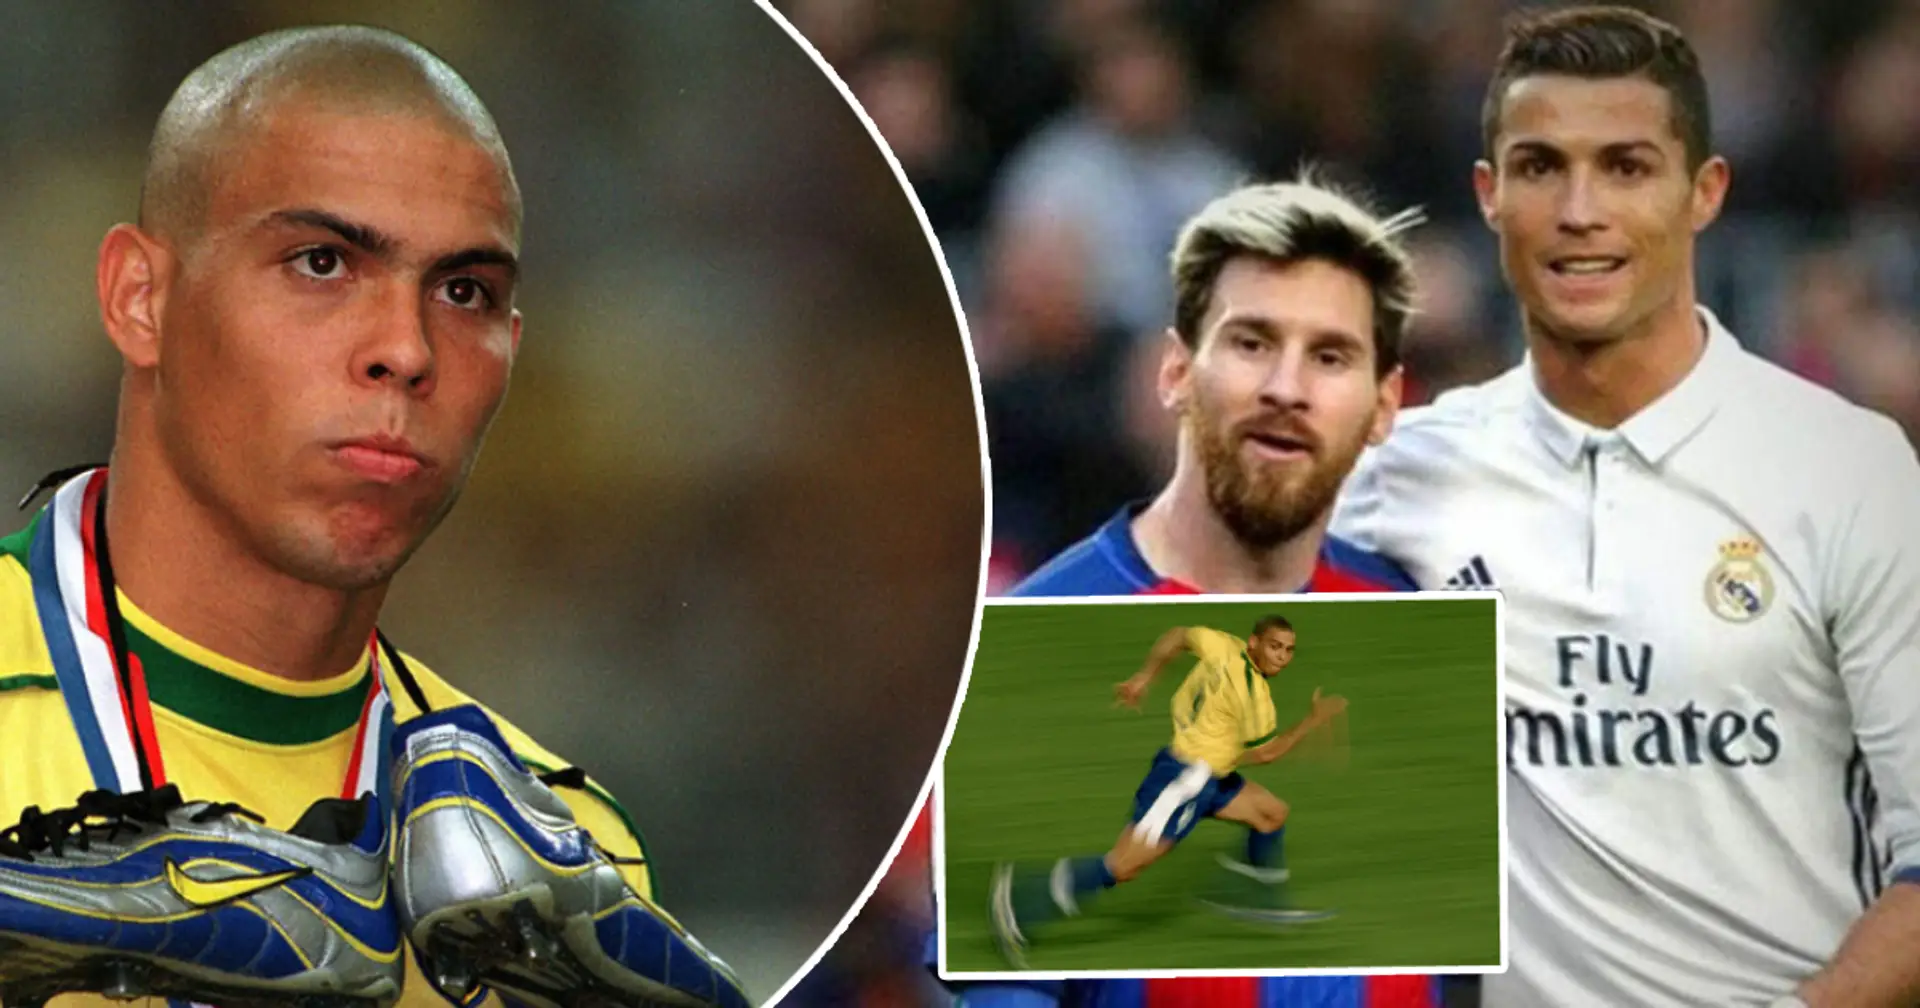 50 greatest footballers of all time named, Ronaldo only 10th